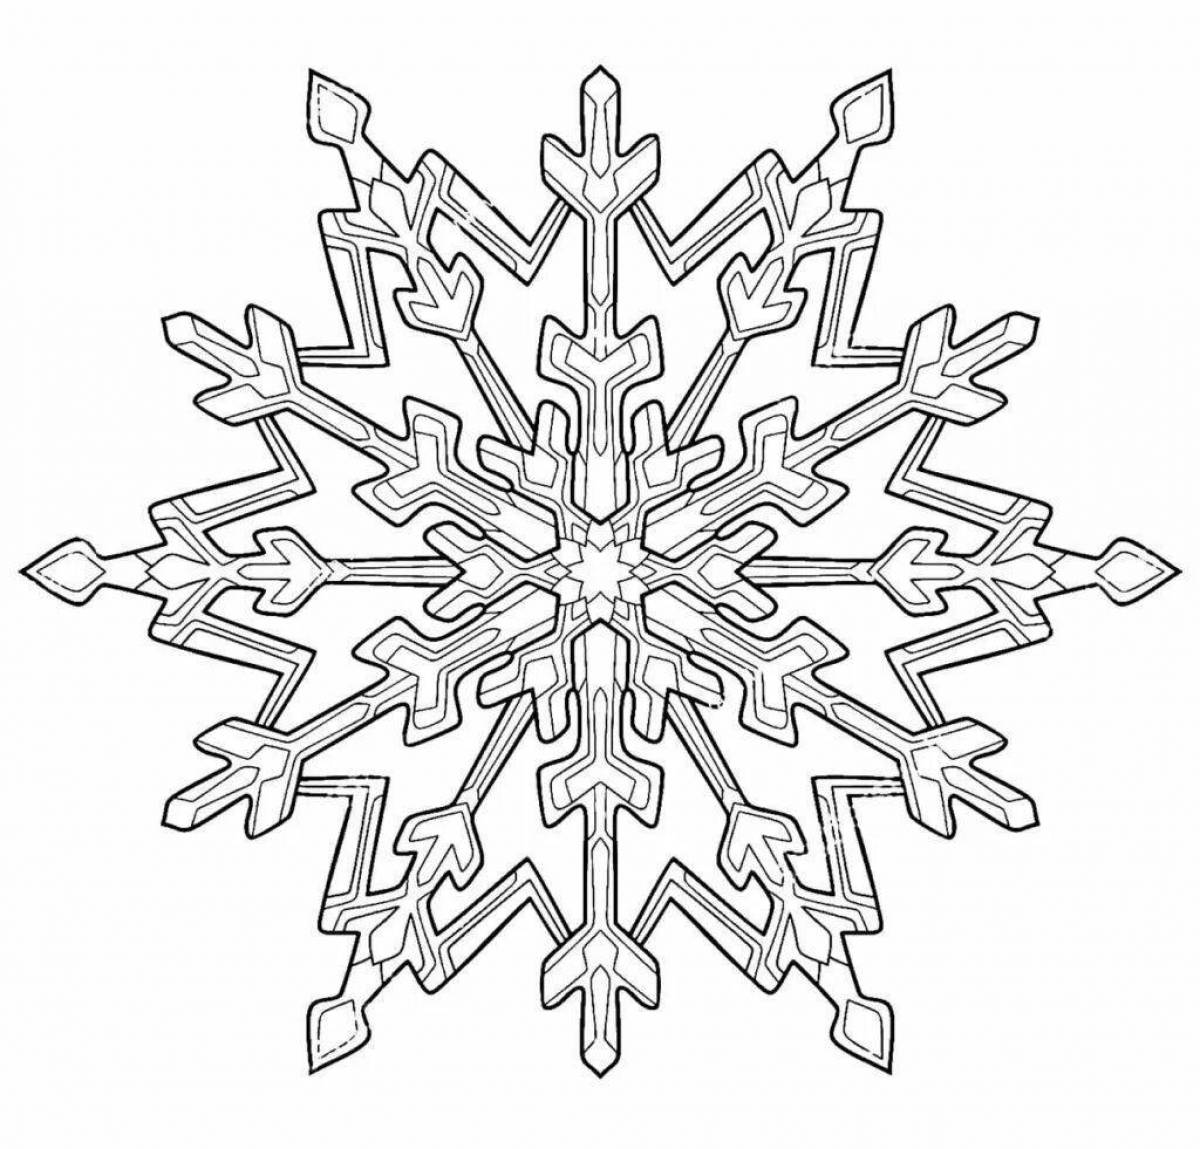 Cute snowflake coloring pages for 4-5 year olds